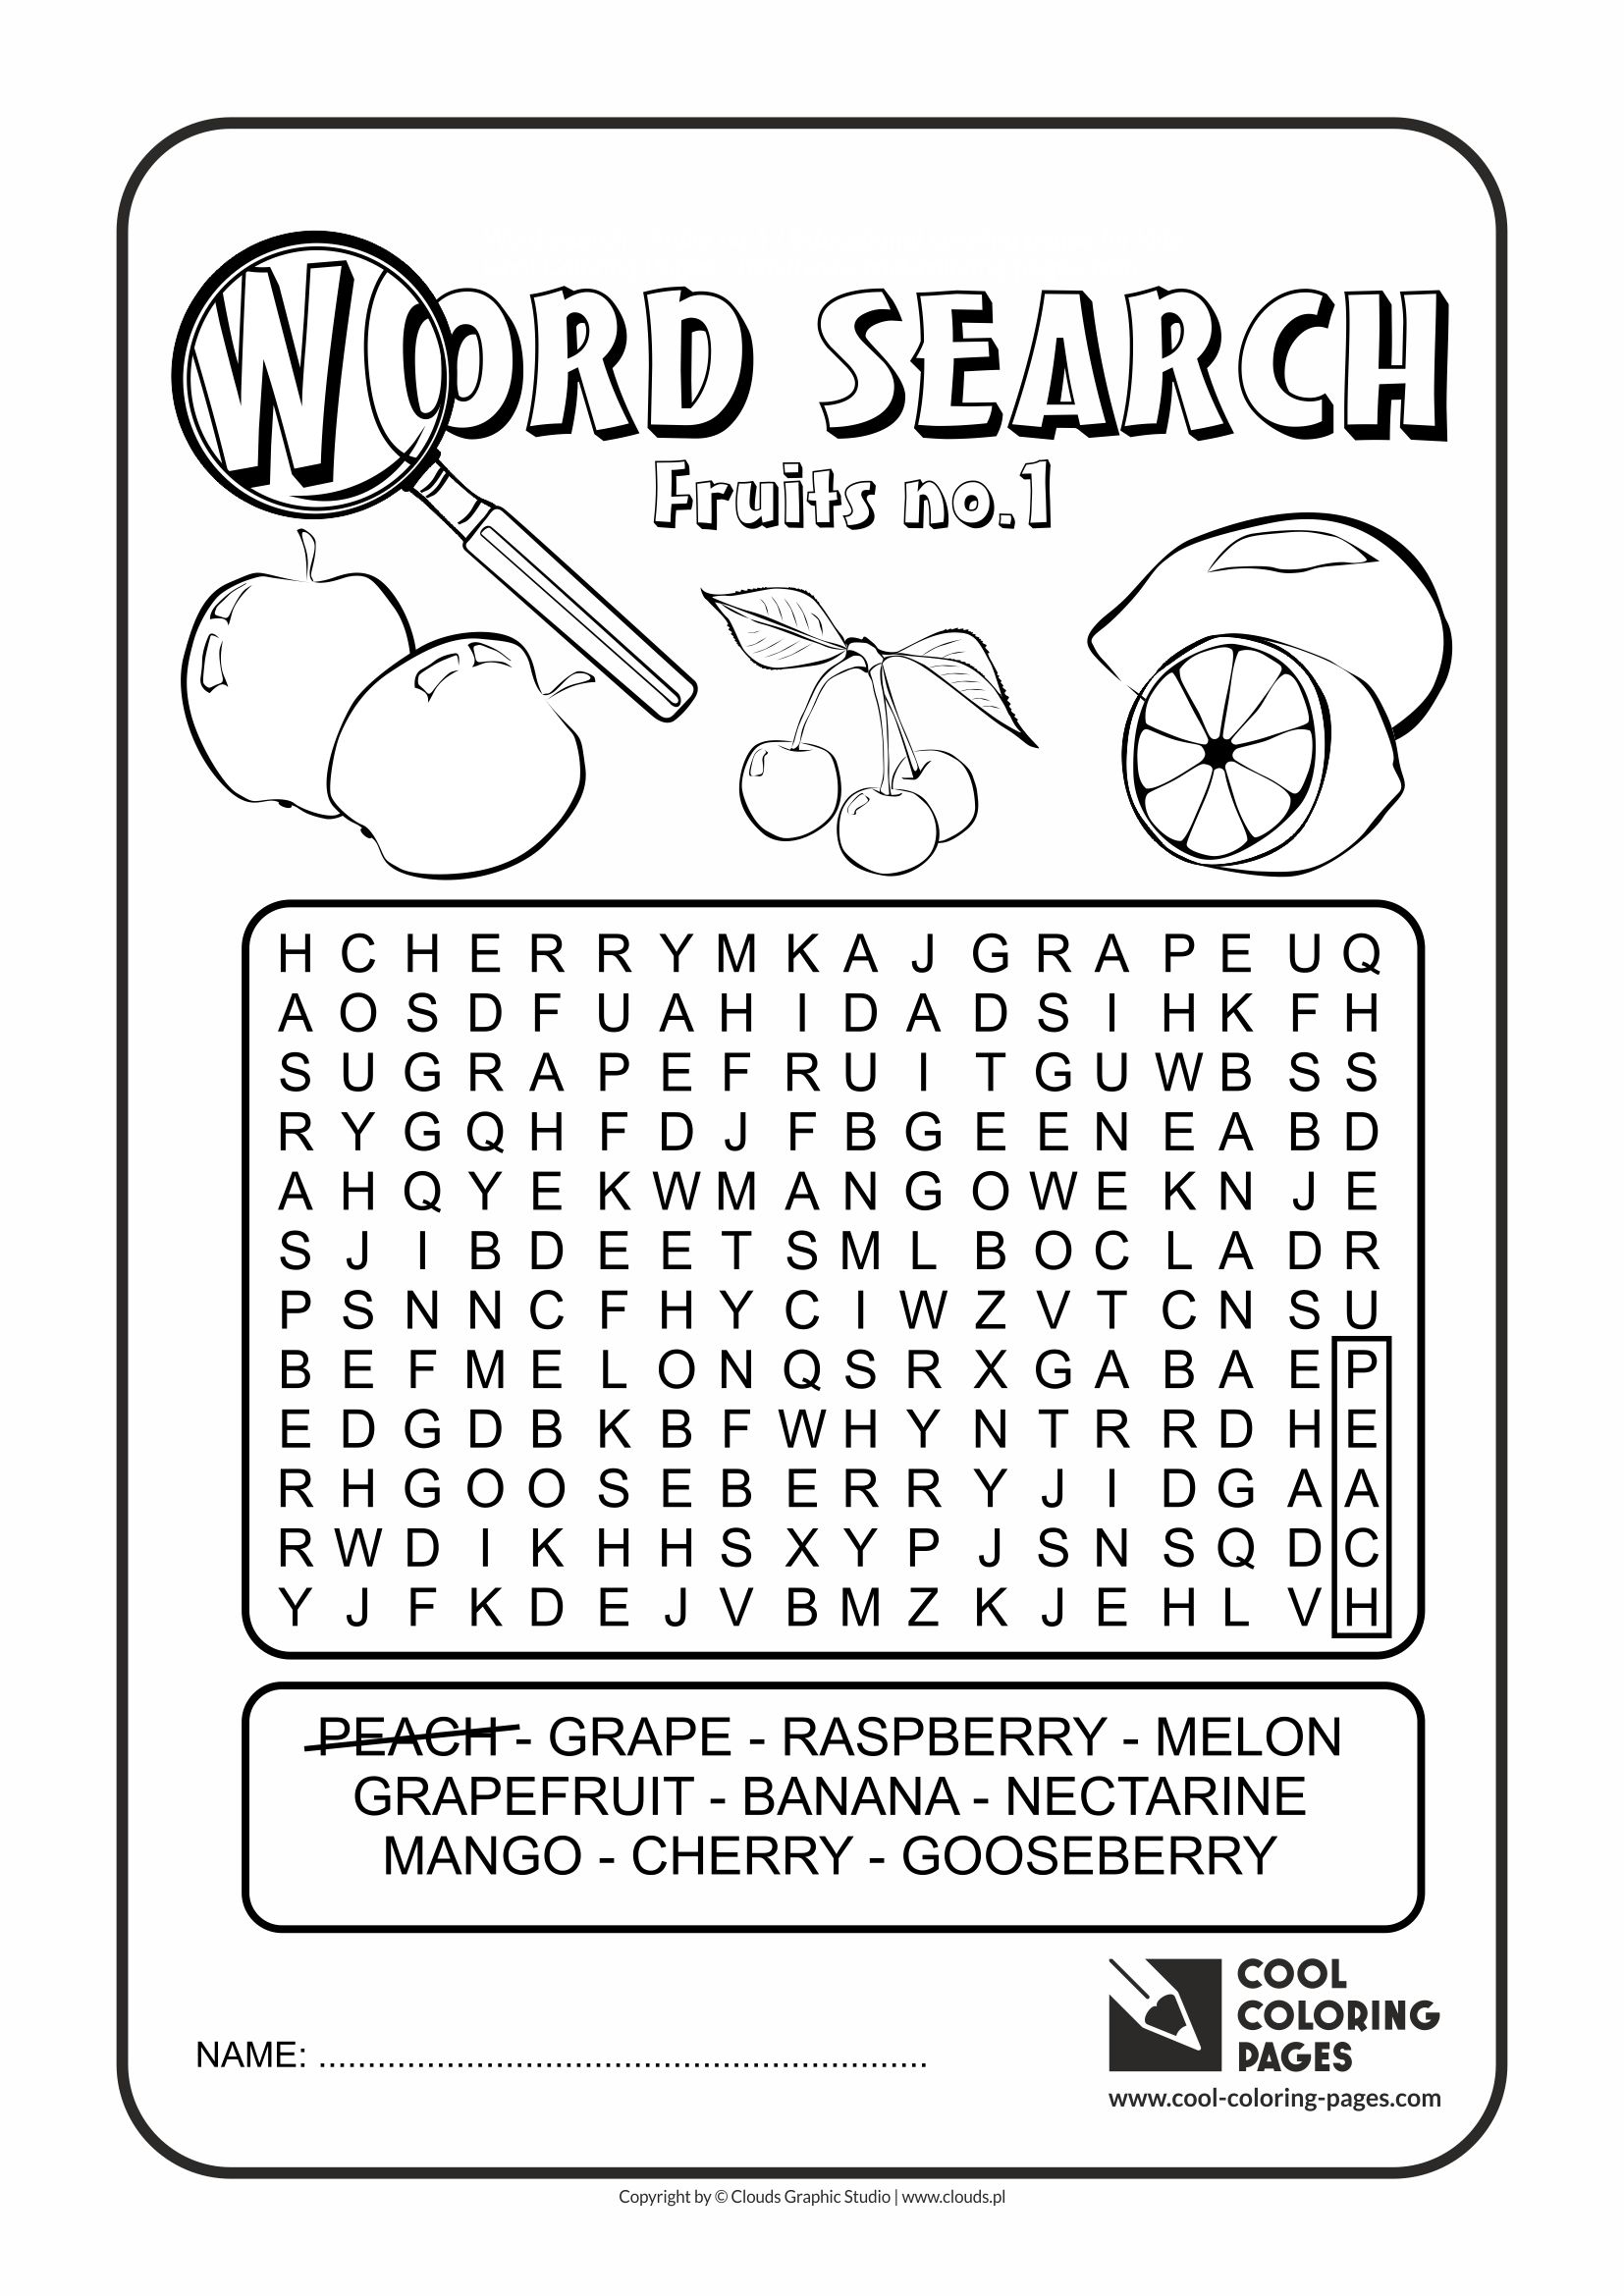 Cool Coloring Pages - Word search / Word search fruits no 1 / Coloring page with word search fruits no 1